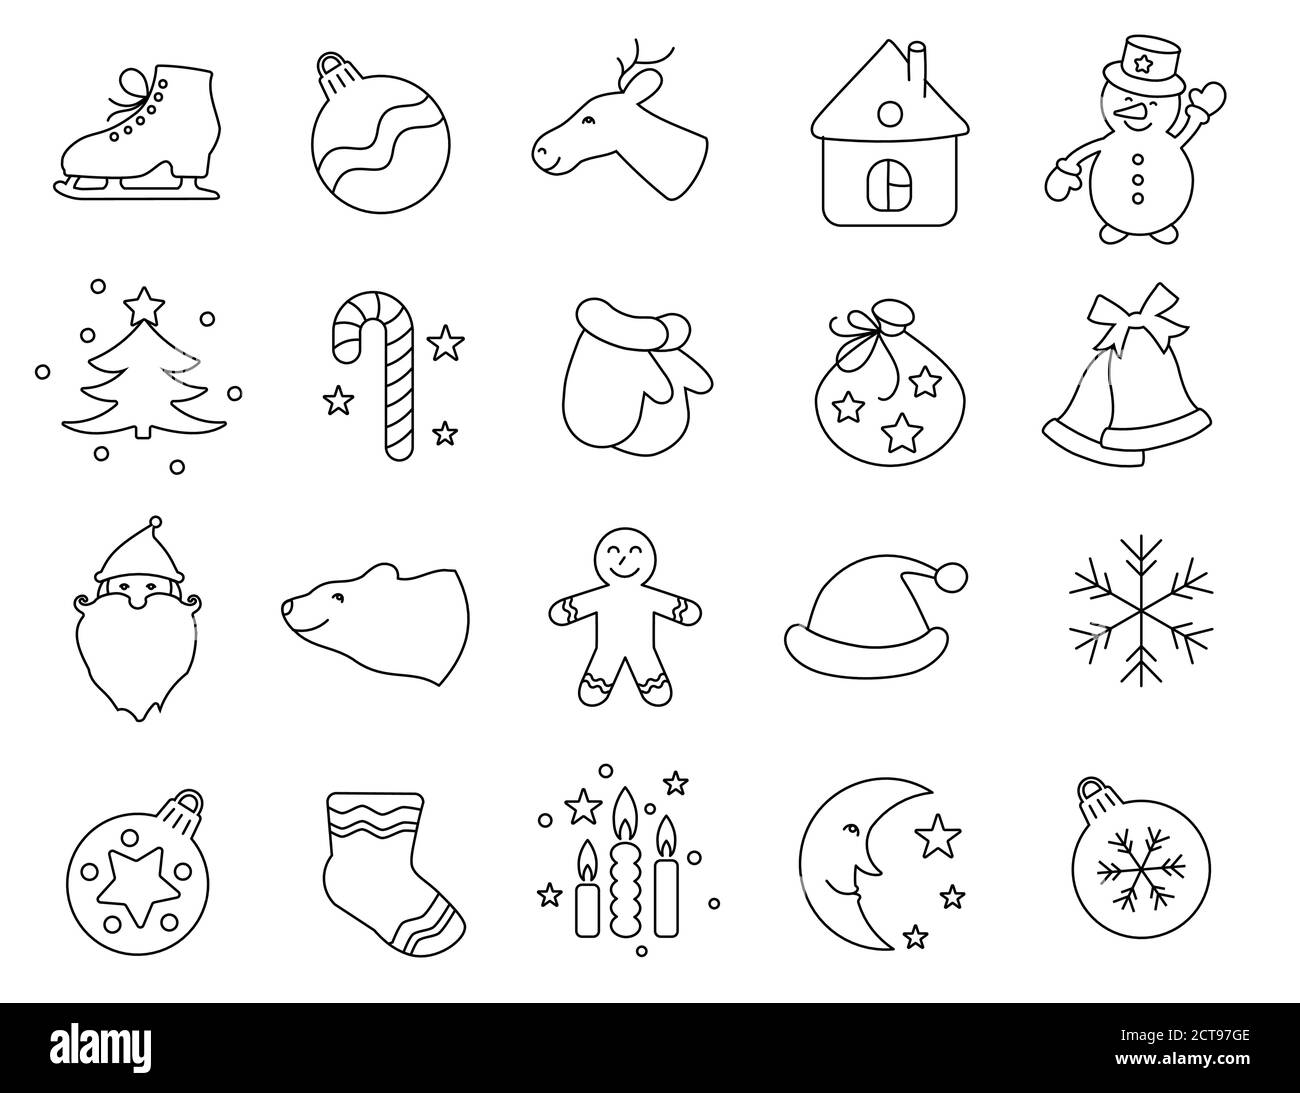 Christmas thin icons for web design and mobile app. Black lines on white background. Sweet christmas candy cane, gingerbread house, man and other Stock Vector